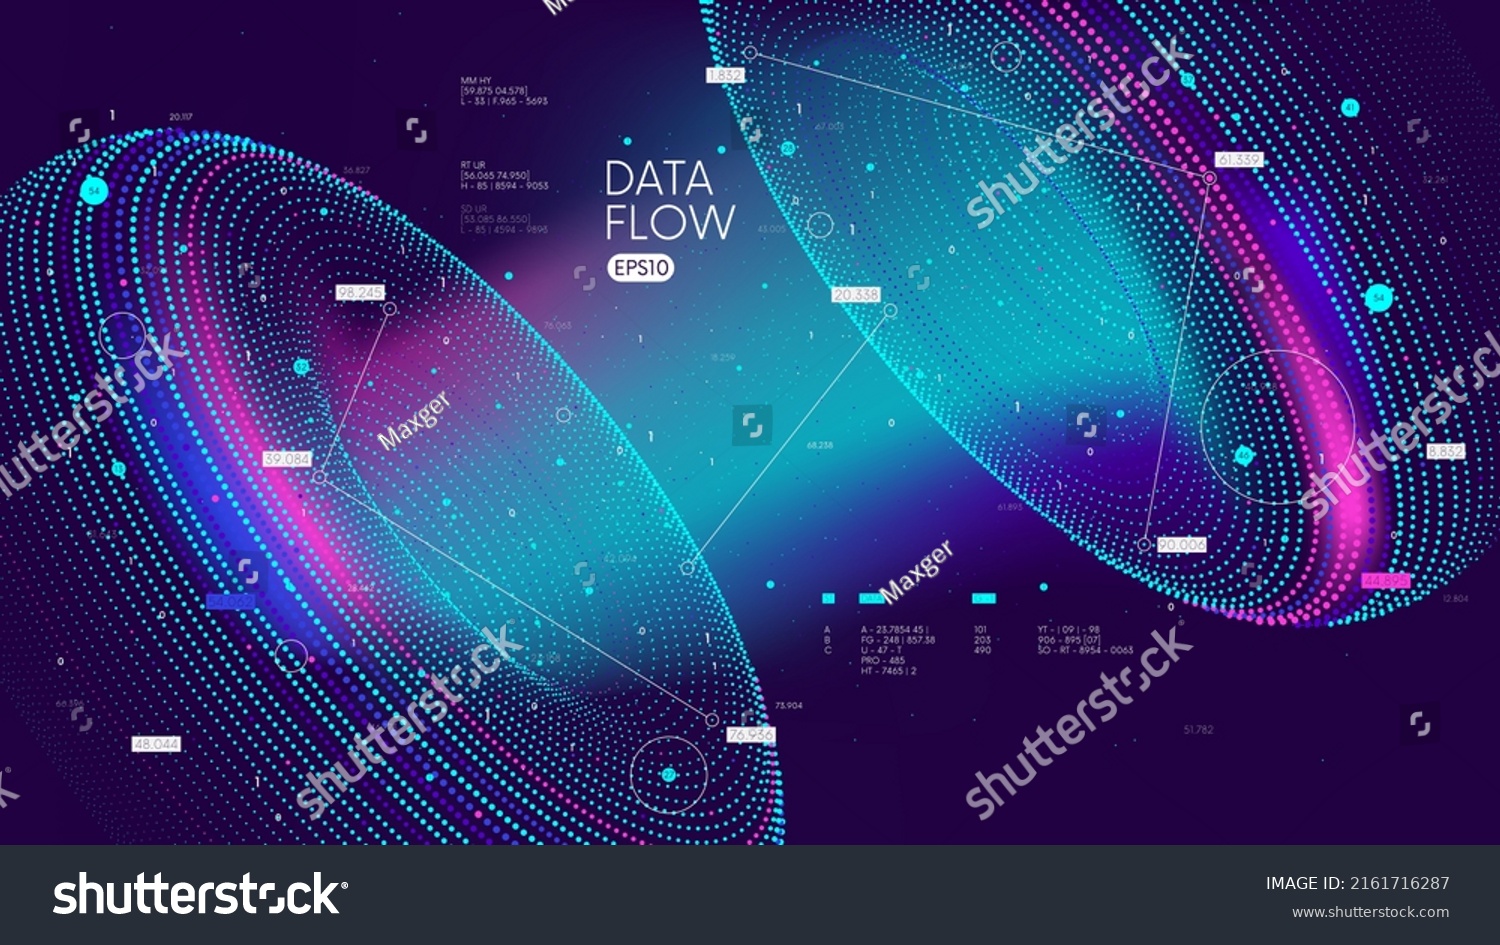 Futuristic technology for processing information analysis and sorting big data, two big database, sharing and structuring information in digital space, vector illustration #2161716287